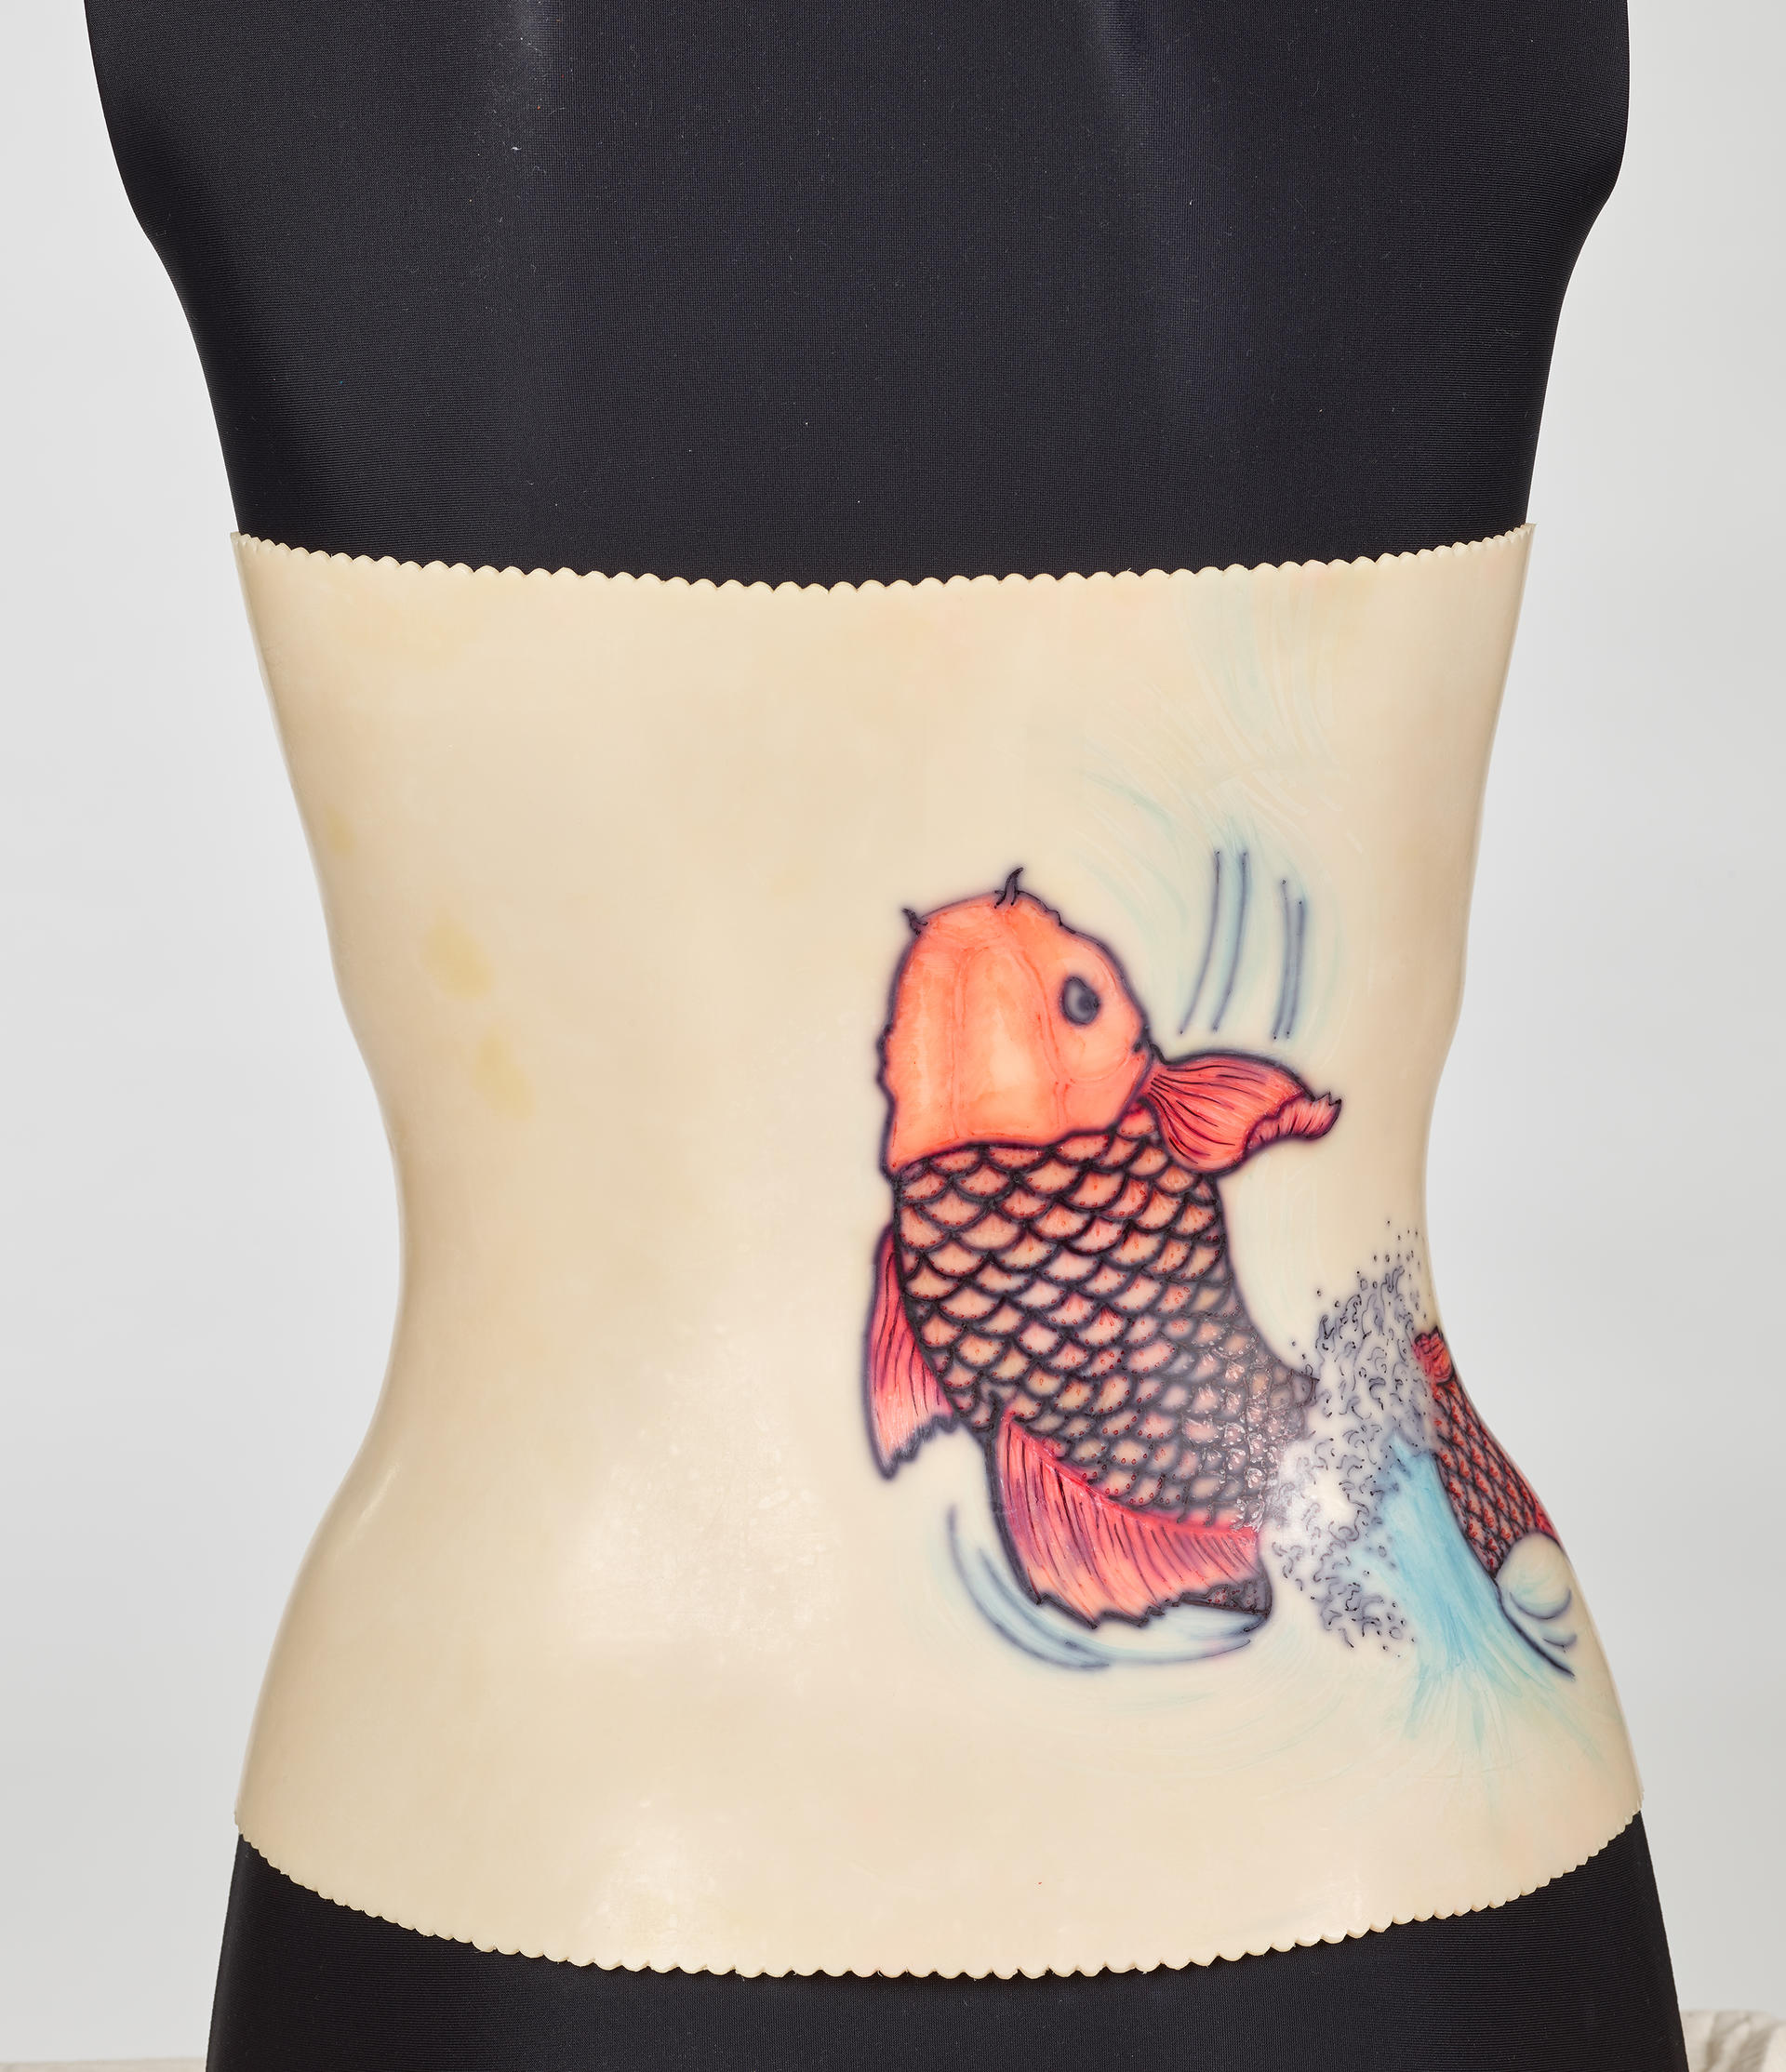 An off-white back brace is molded onto a black mannequin torso. The plastic brace attaches down the middle of the torso. A red koi design decorates the right side.